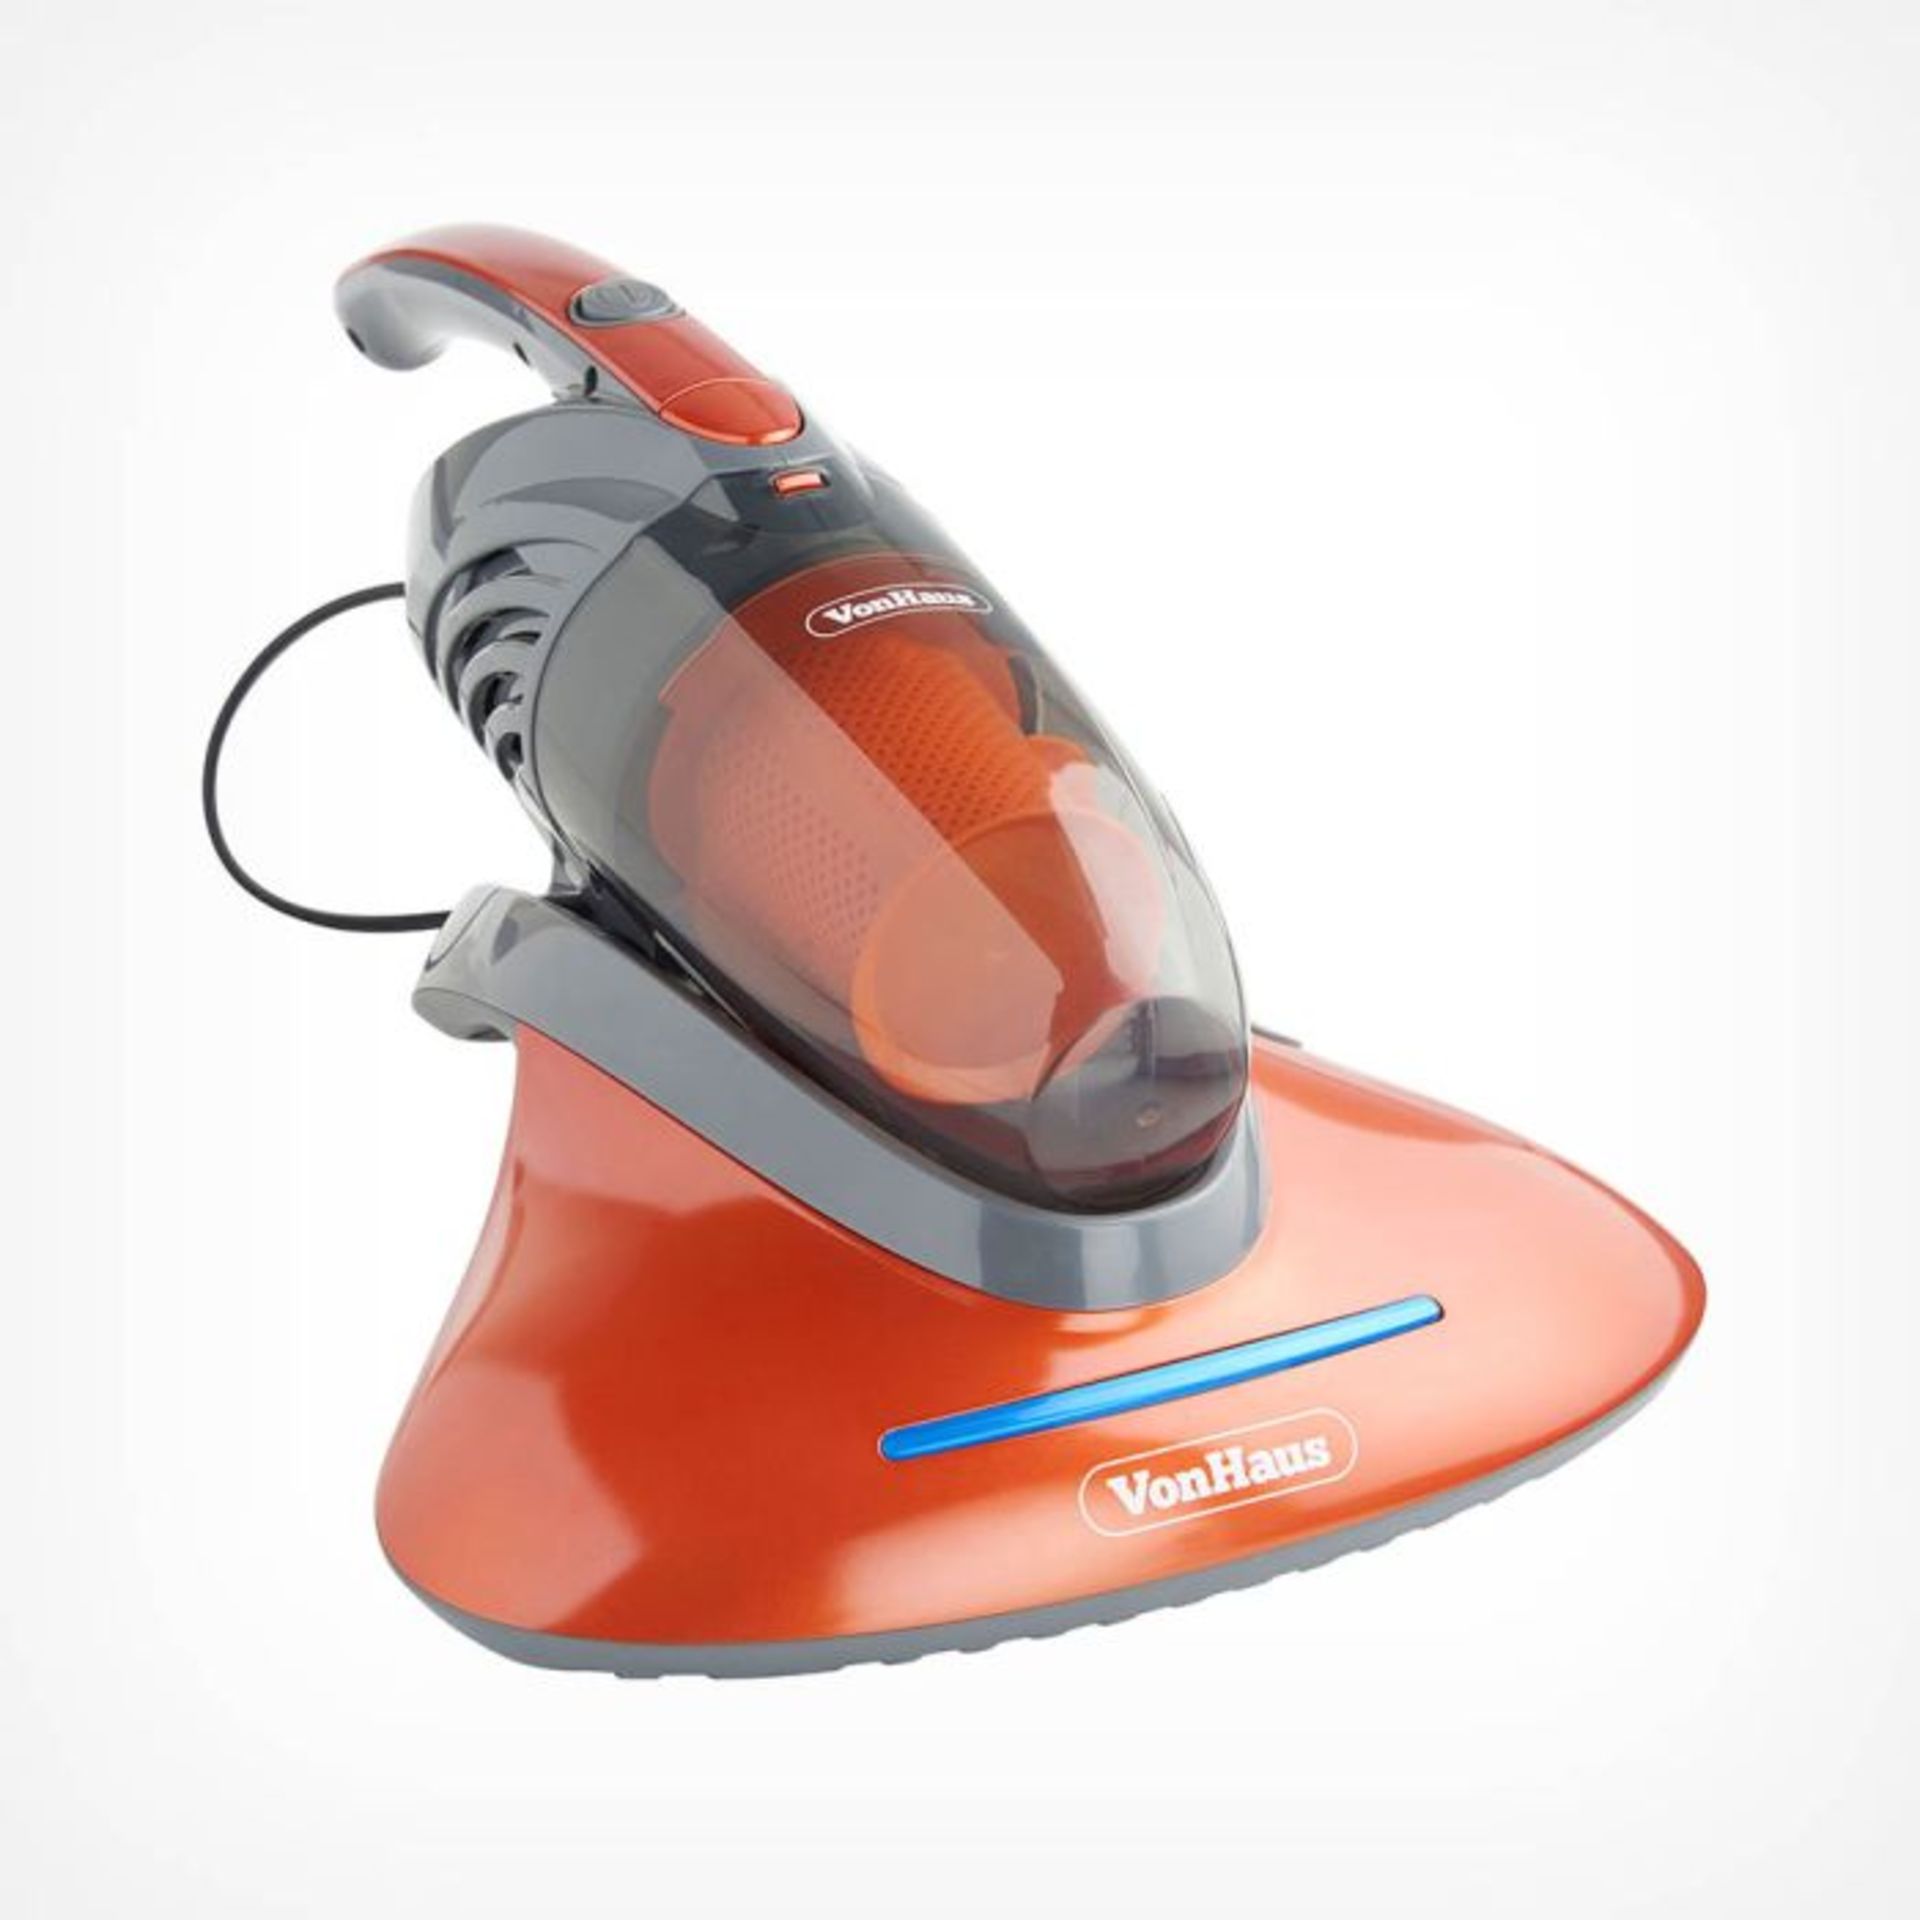 Handheld UV Vacuum. - ER43. Equipped with a potent UV lamp, this nifty handheld hoover eradicates